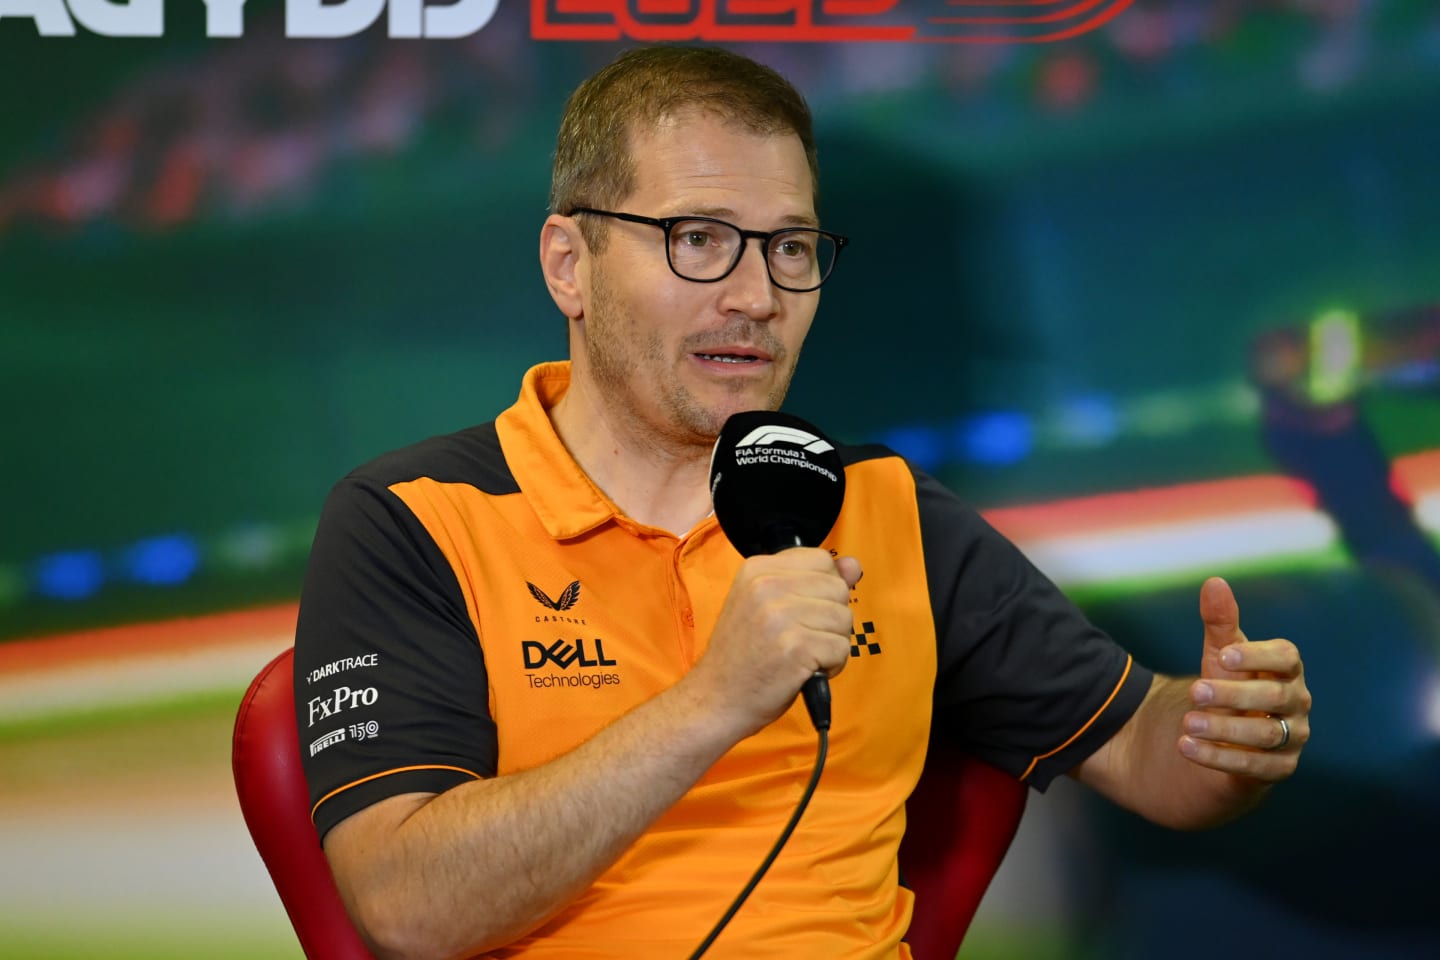 BUDAPEST, HUNGARY - JULY 30: McLaren Team Principal Andreas Seidl attends the Team Principals Press Conference prior to  final practice ahead of the F1 Grand Prix of Hungary at Hungaroring on July 30, 2022 in Budapest, Hungary. (Photo by Dan Mullan/Getty Images)